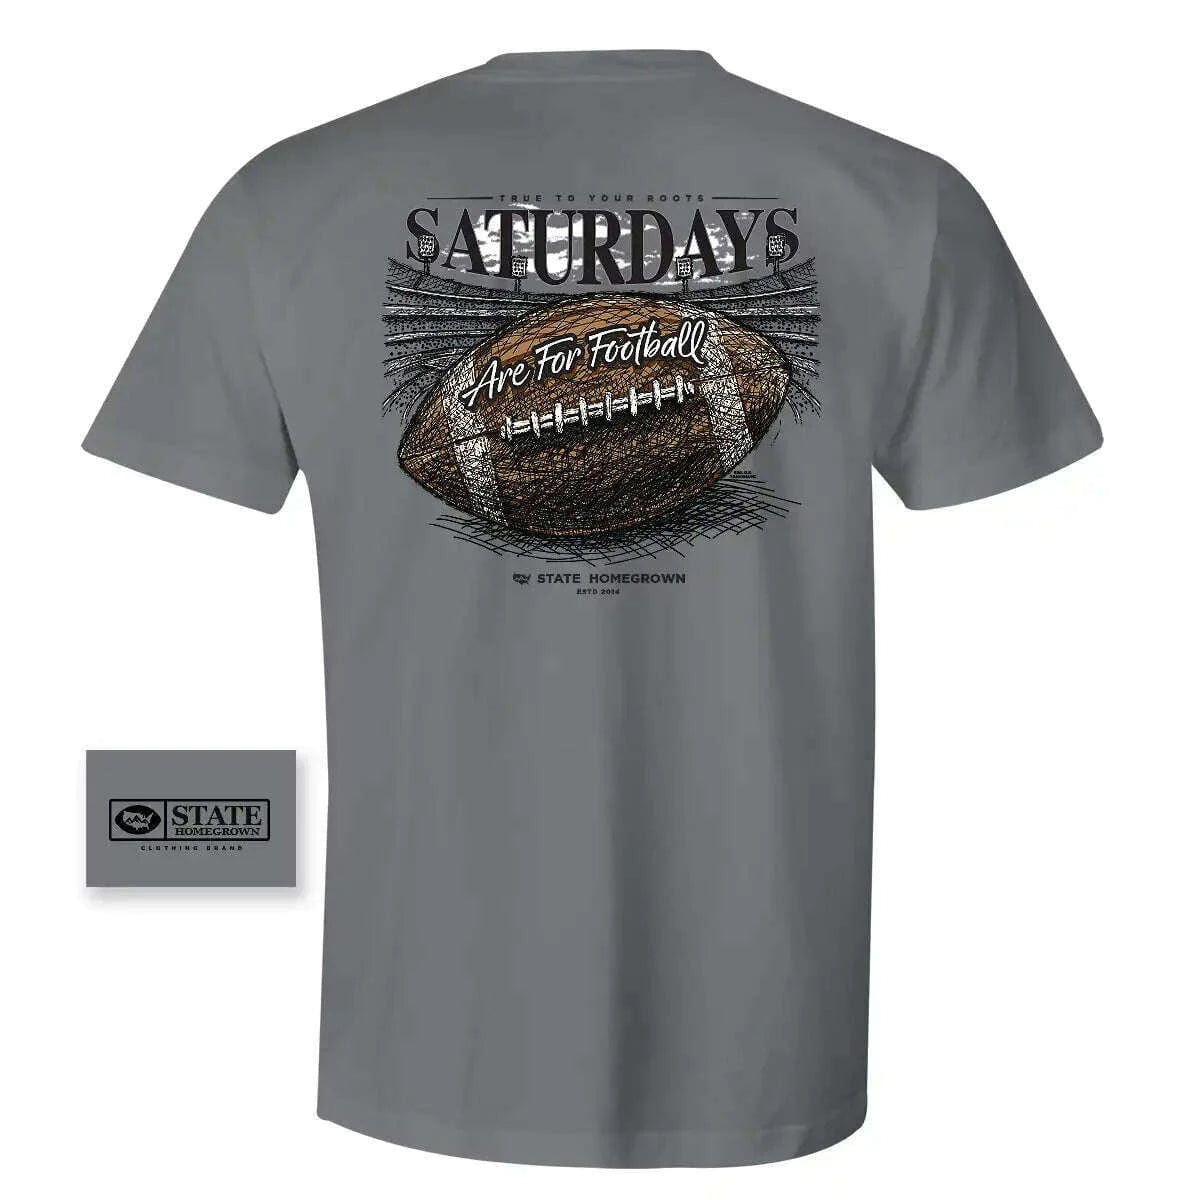 State Homegrown Shirts Small / Gray Saturdays are for Football